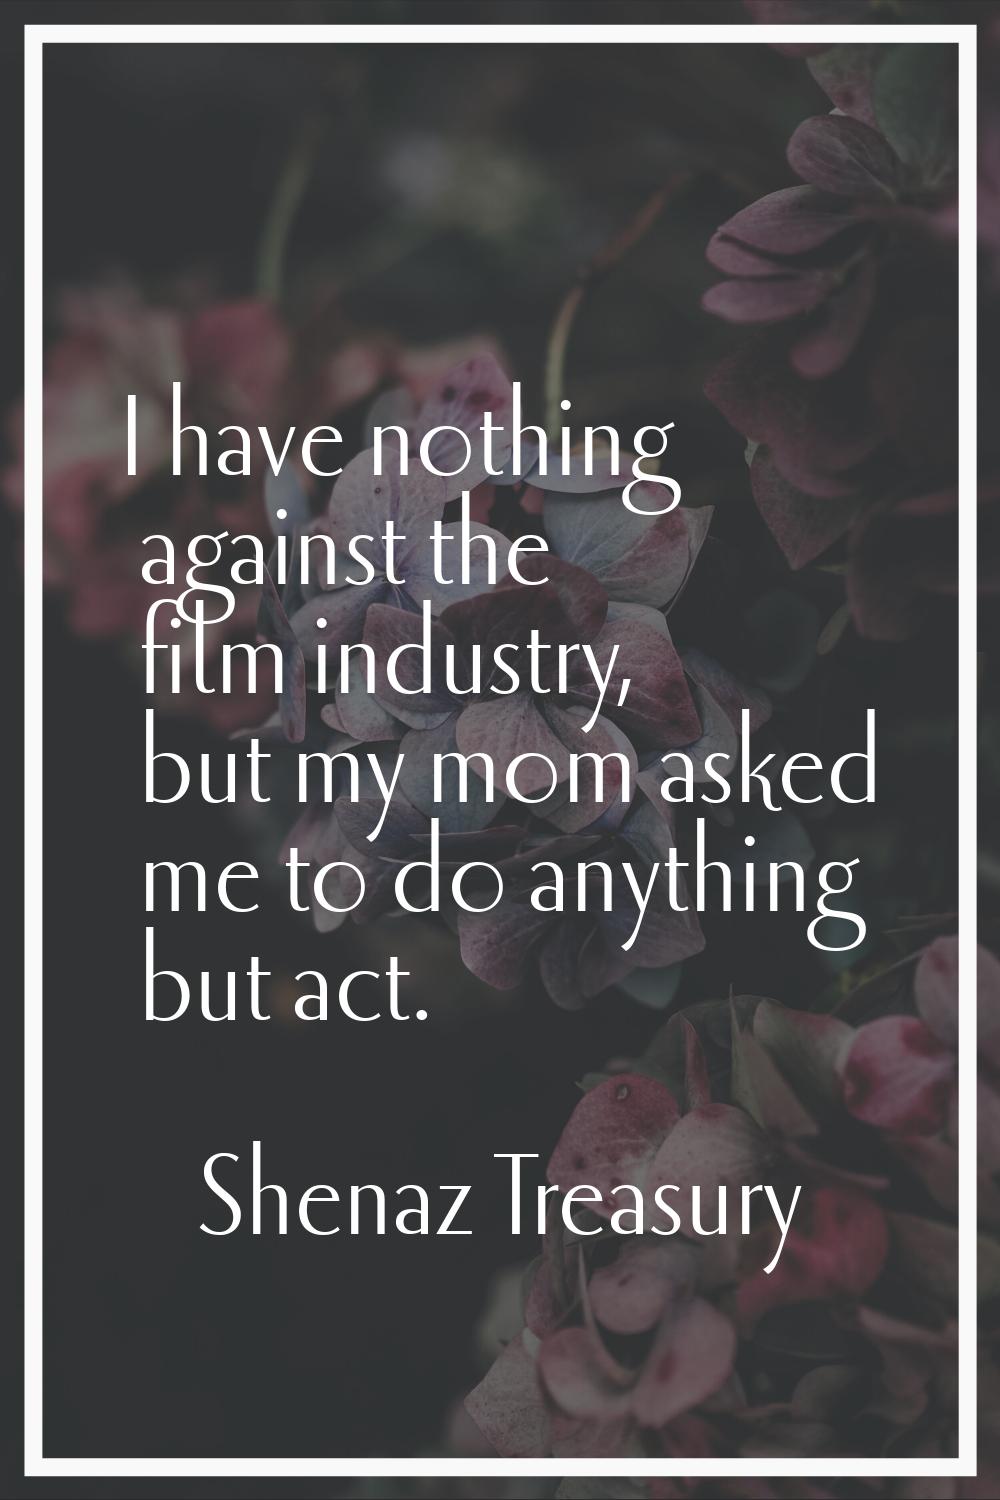 I have nothing against the film industry, but my mom asked me to do anything but act.